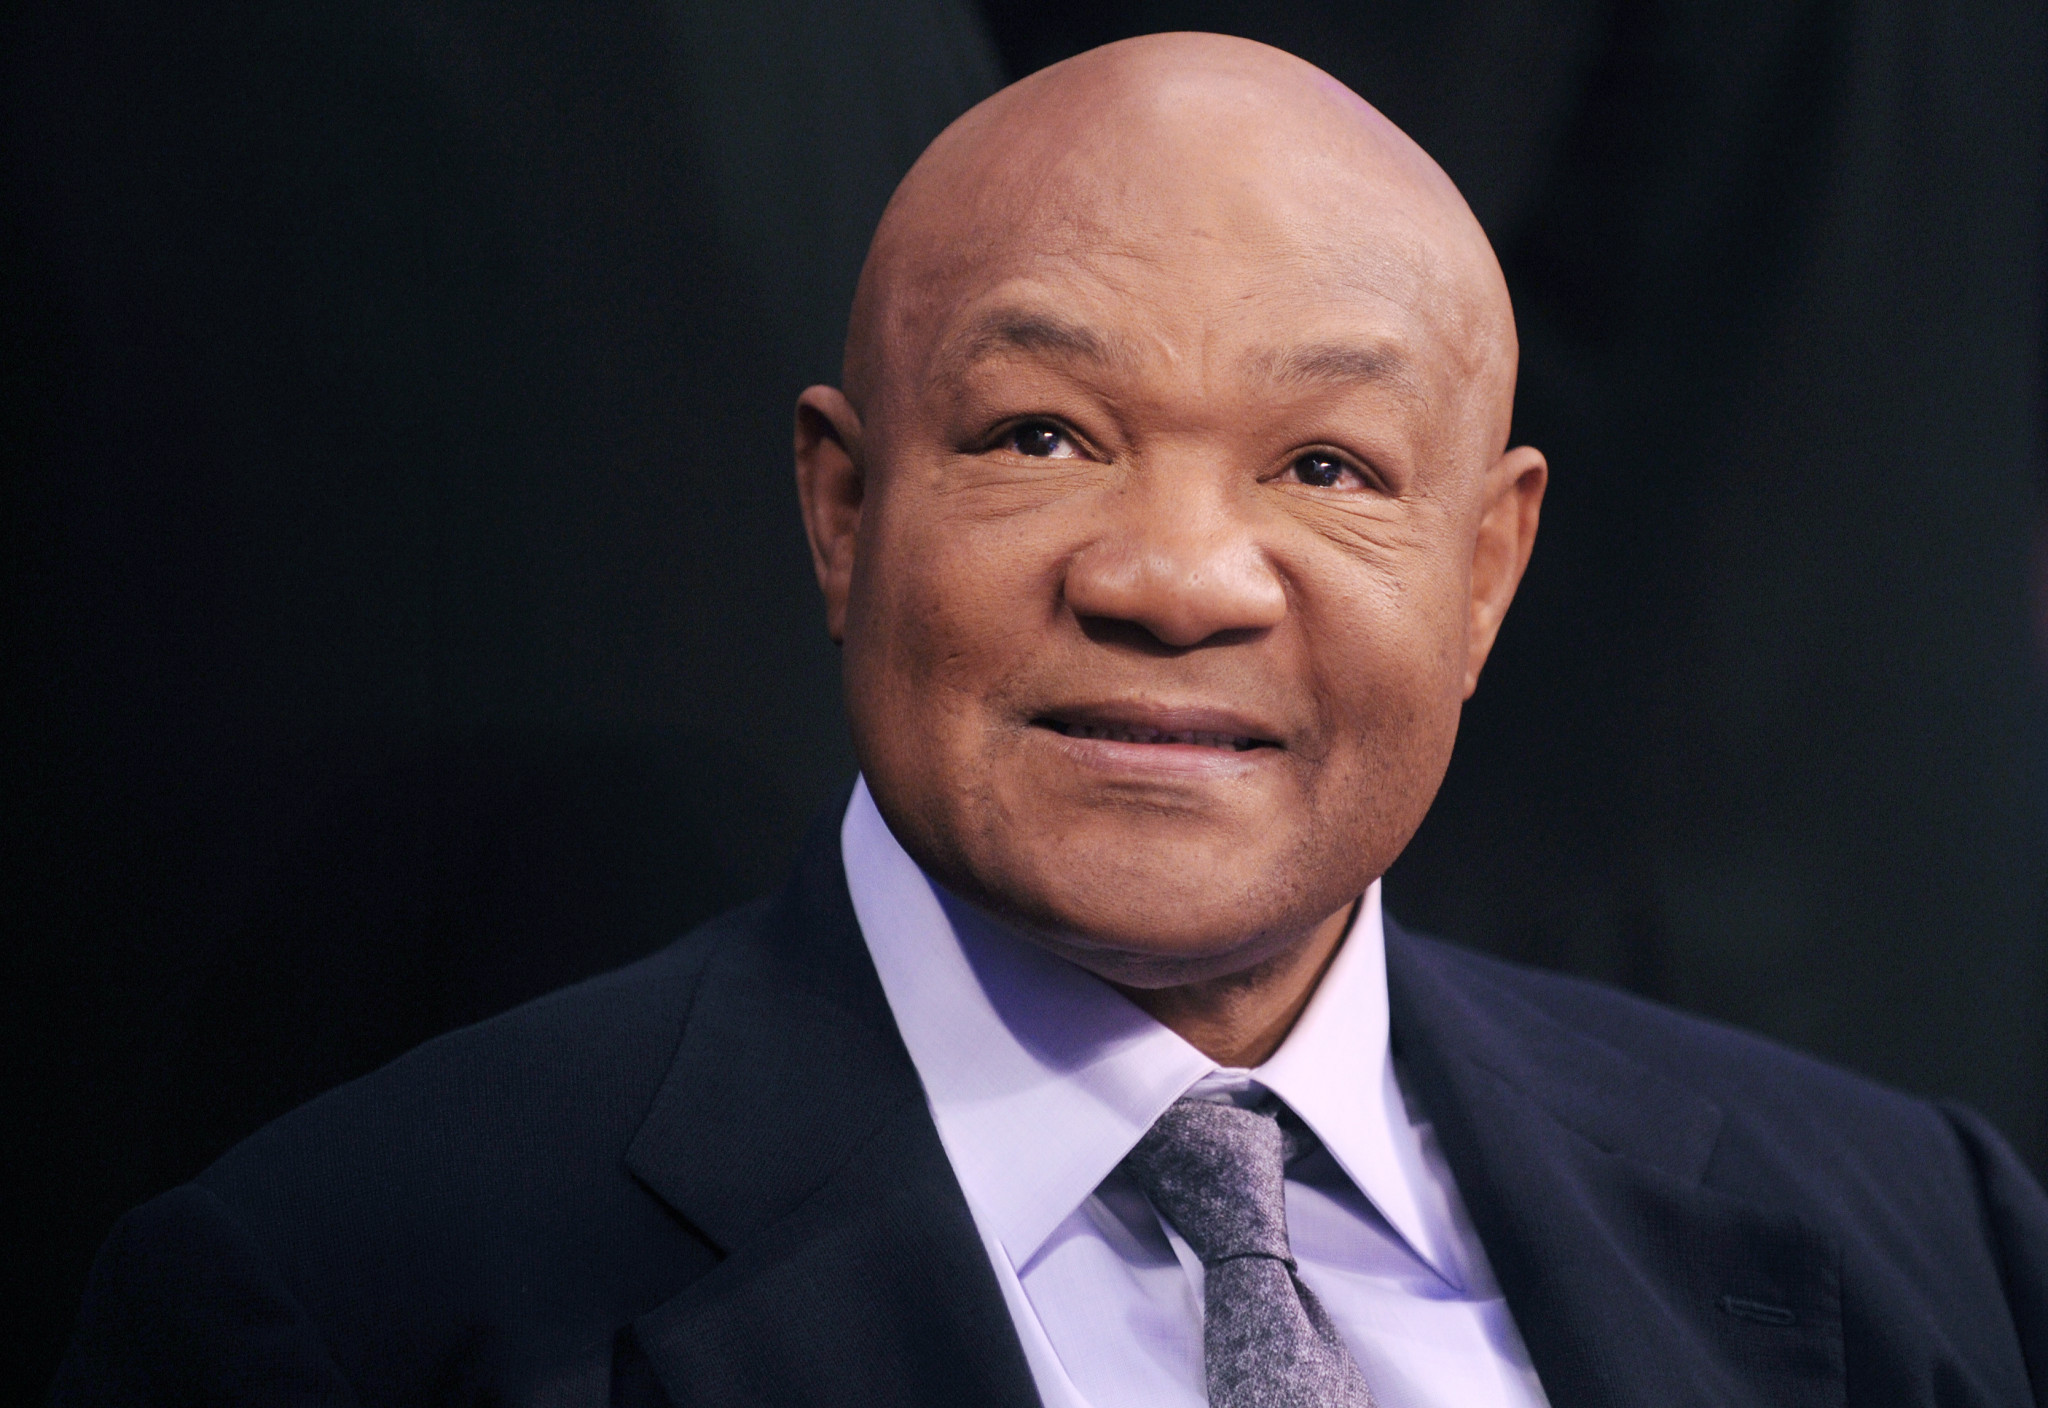 George Foreman has been accused by two women of sexual assault ©Getty Images